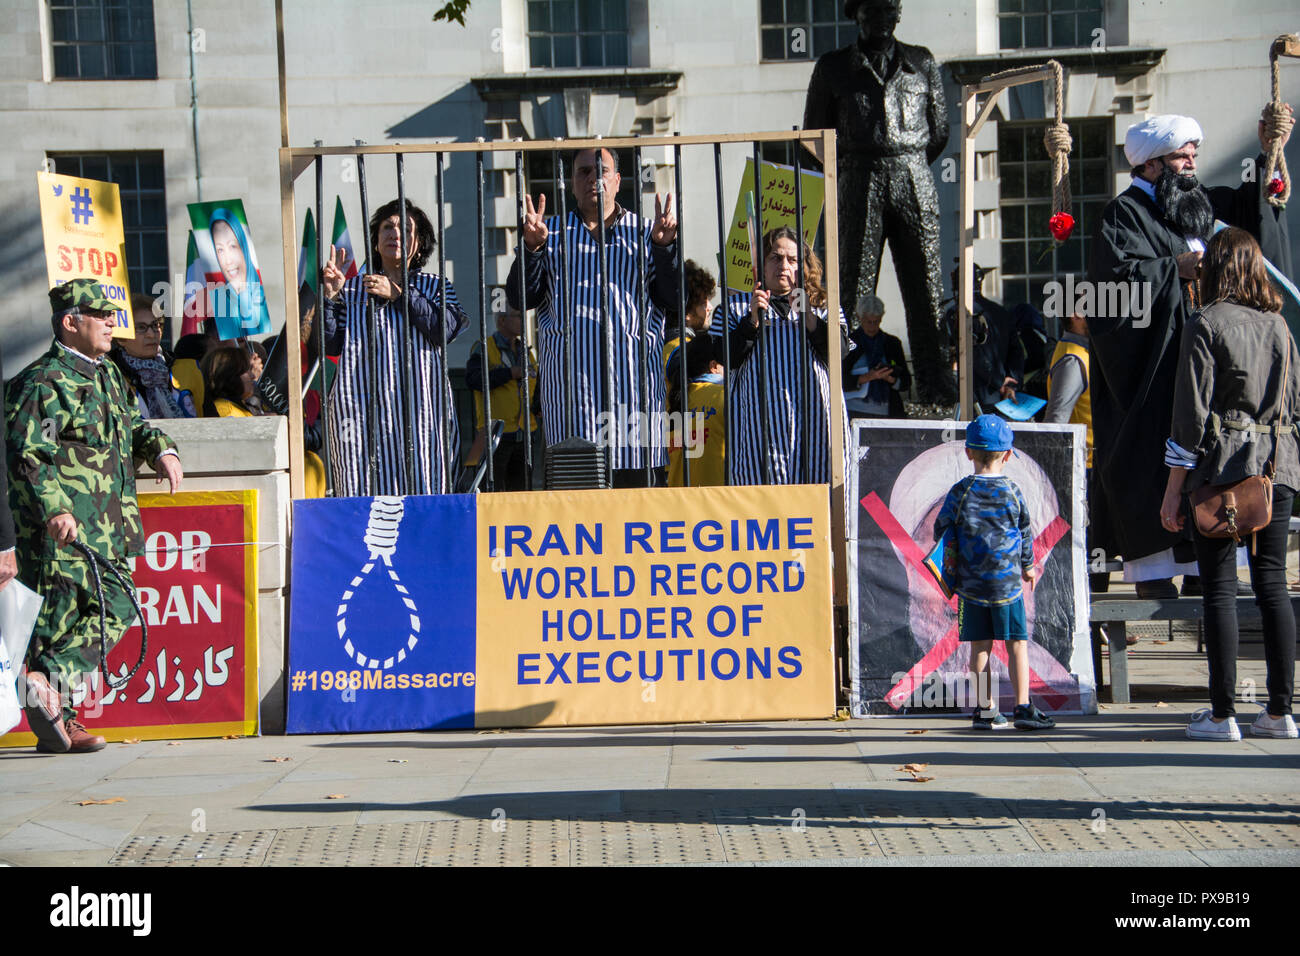 London, England, UK. 20 October, 2018.  Stop executions in Iran protest in Whitehall, London, UK © Jansos / Alamy Live News. Stock Photo